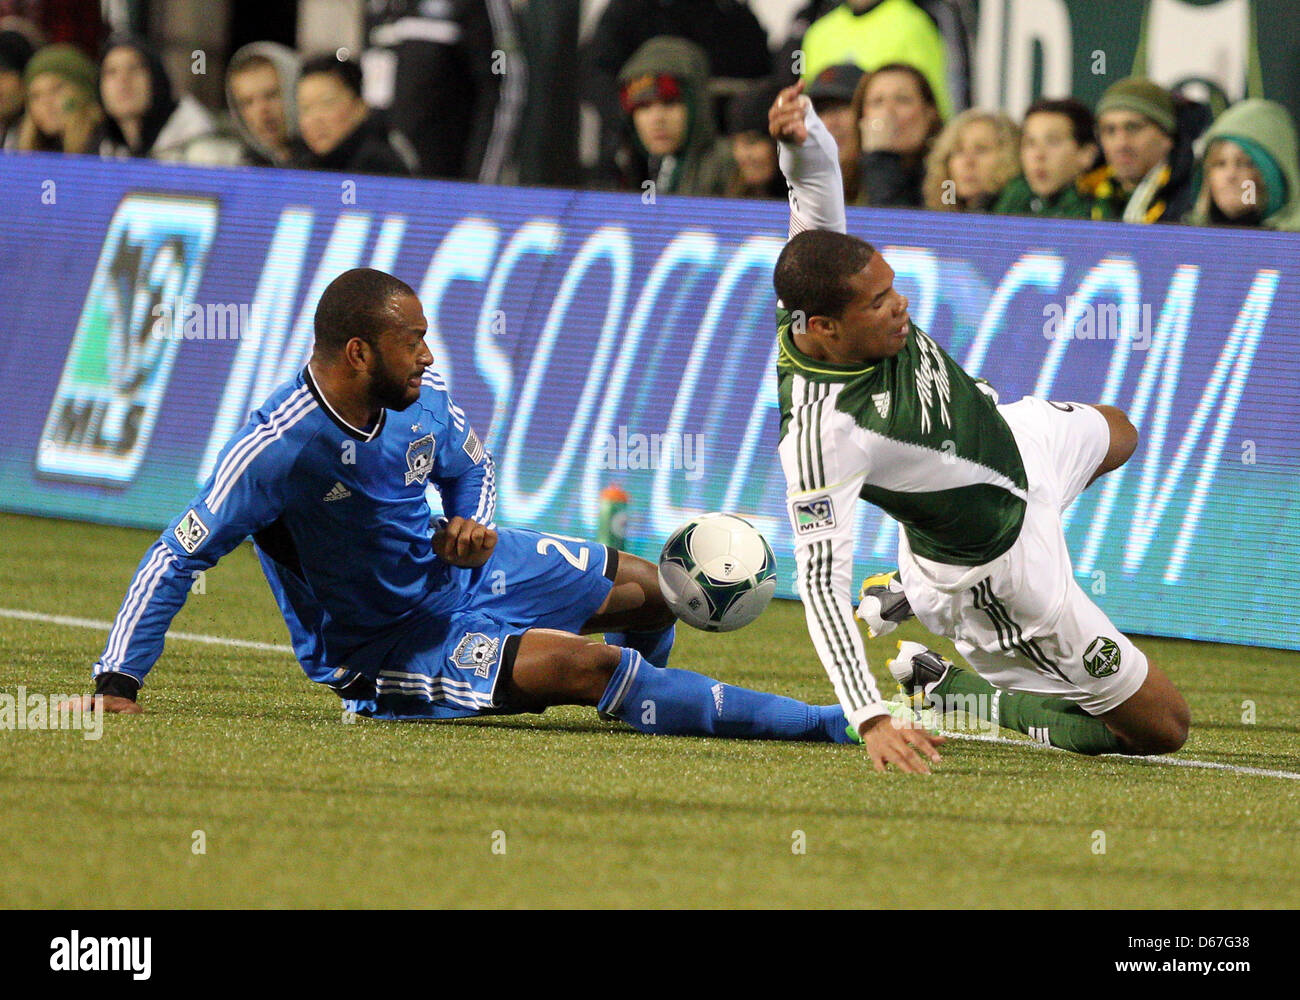 April 14, 2013 - Portland, OR, USA - April 14, 2013: #26 Victor Bernardez of the San Jose Earthquakes and #9 Ryan Johnson of the Portland Timbers collide during the Timbers 1-0 win over the visiting Earthquakes at Jeld Wen Stadium, Portland, OR Stock Photo